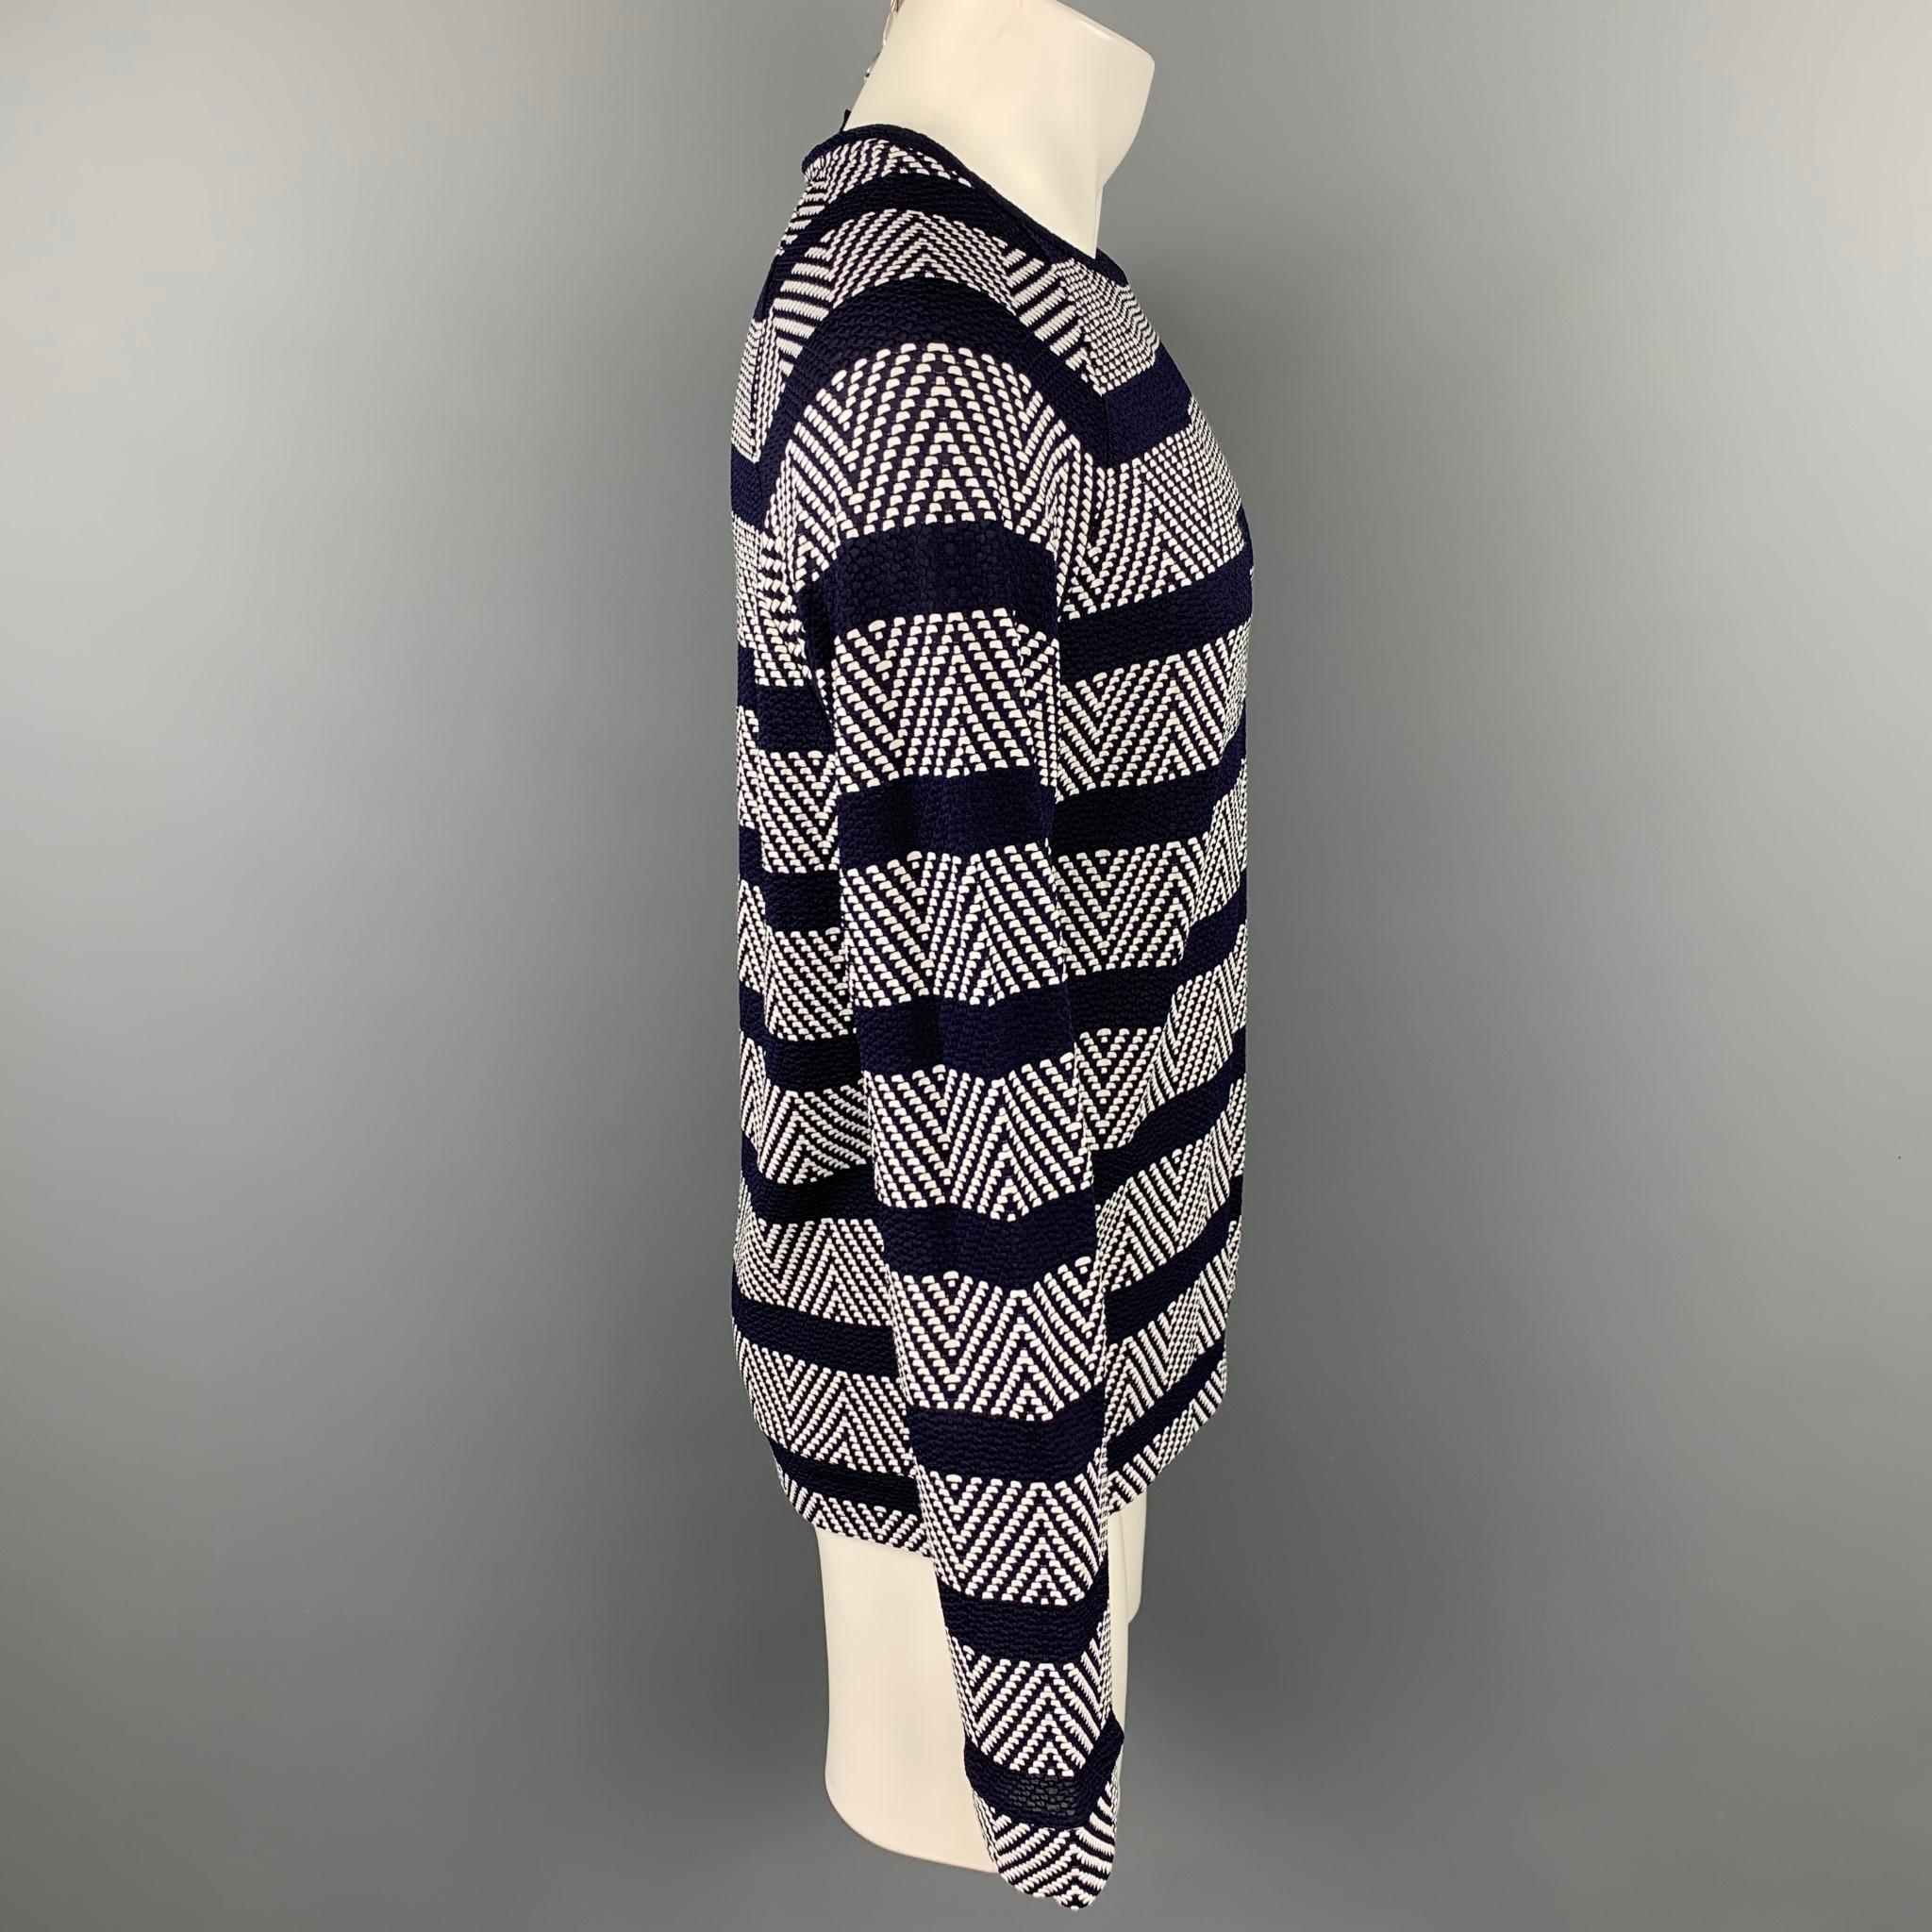 GIORGIO ARMANI pullover comes in a navy & white textured viscose blend featuring a raglan style and a crew-neck. Made in Italy

Excellent Pre-Owned Condition.
Marked: IT 50

Measurements:

Shoulder: 16.5 in.
Chest: 42 in.
Sleeve: 30 in.
Length: 28